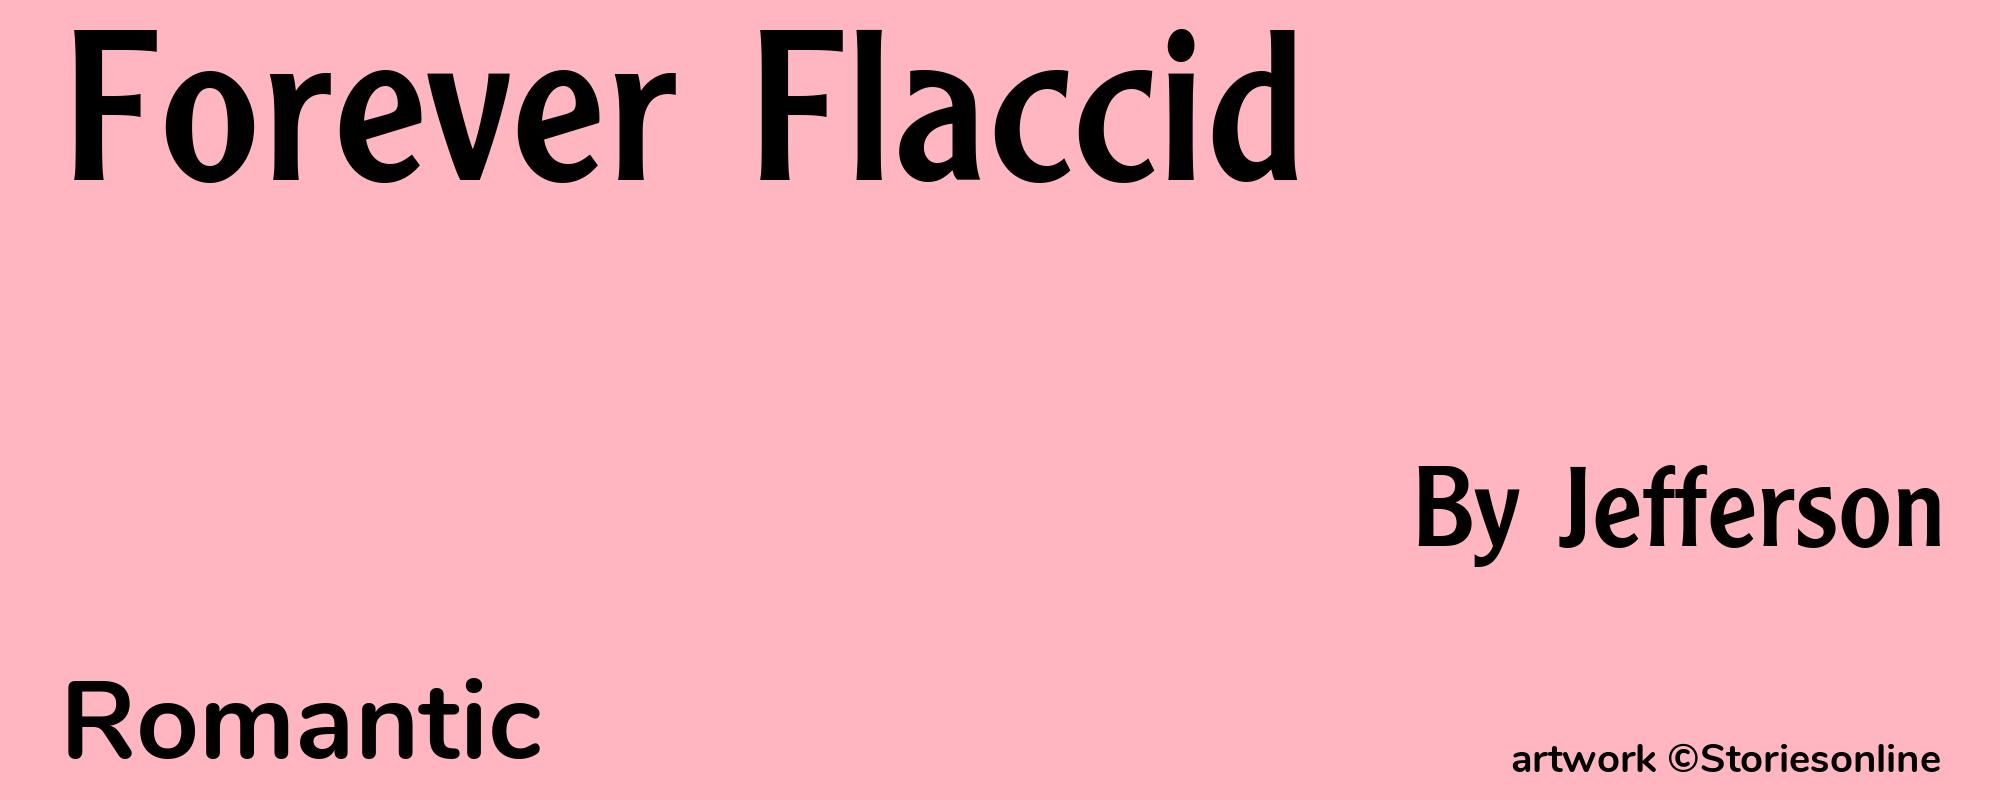 Forever Flaccid - Cover